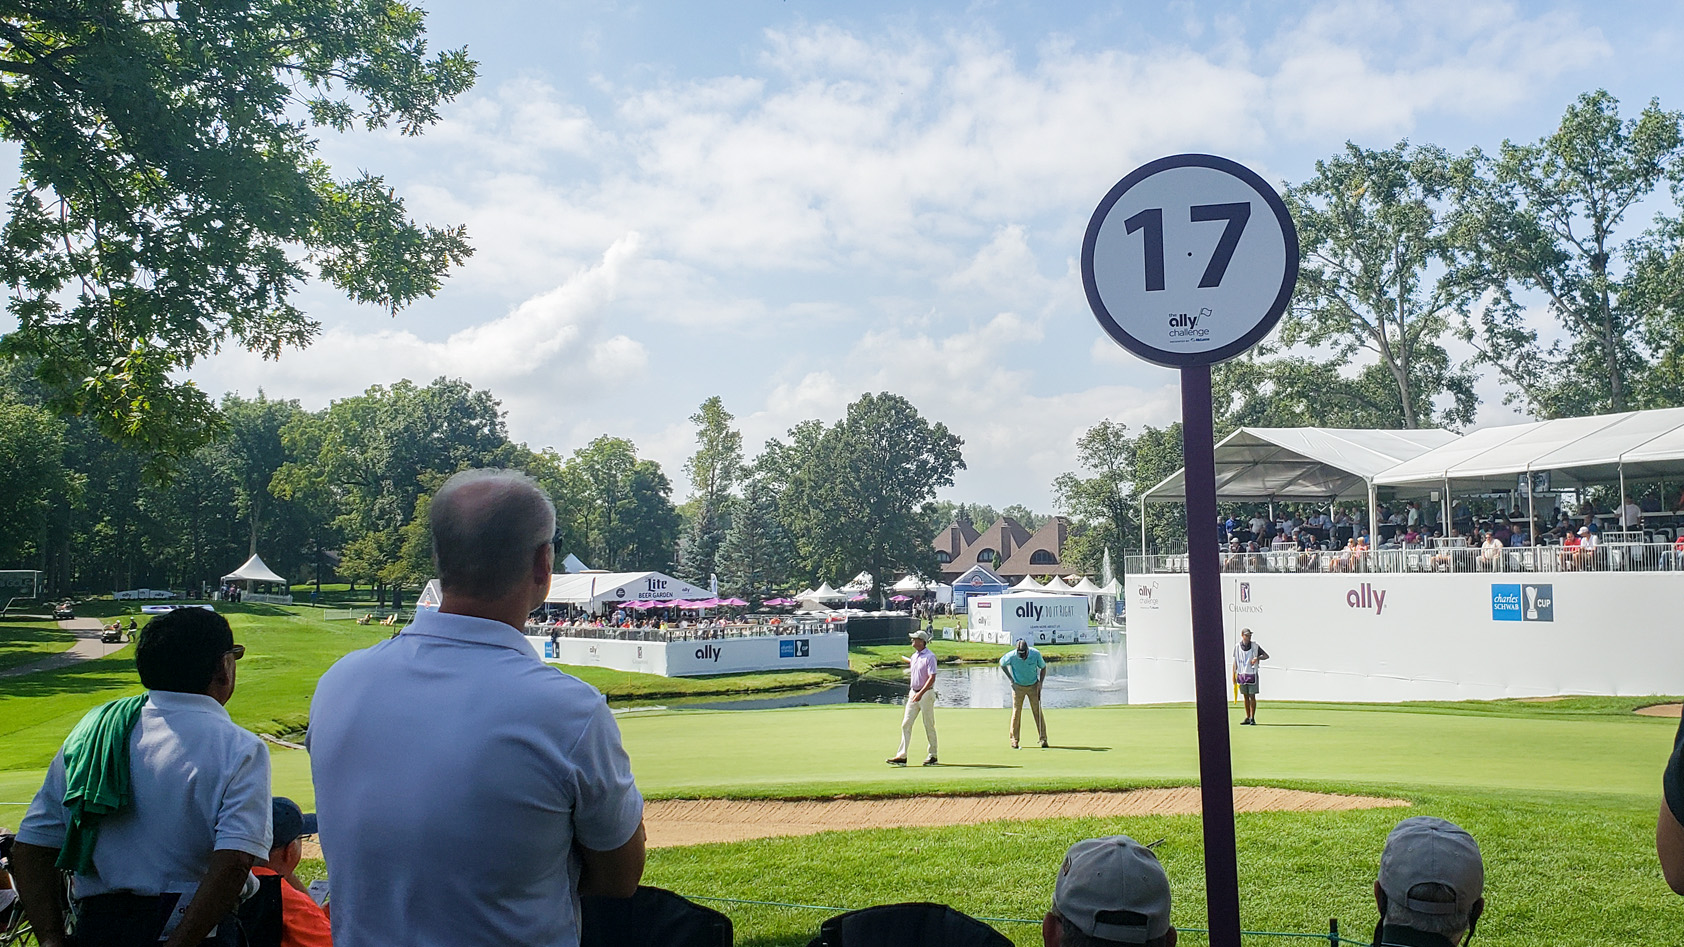 Fans watch golfers from 17th hole at Ally Challenge in Grand Blanc, MI